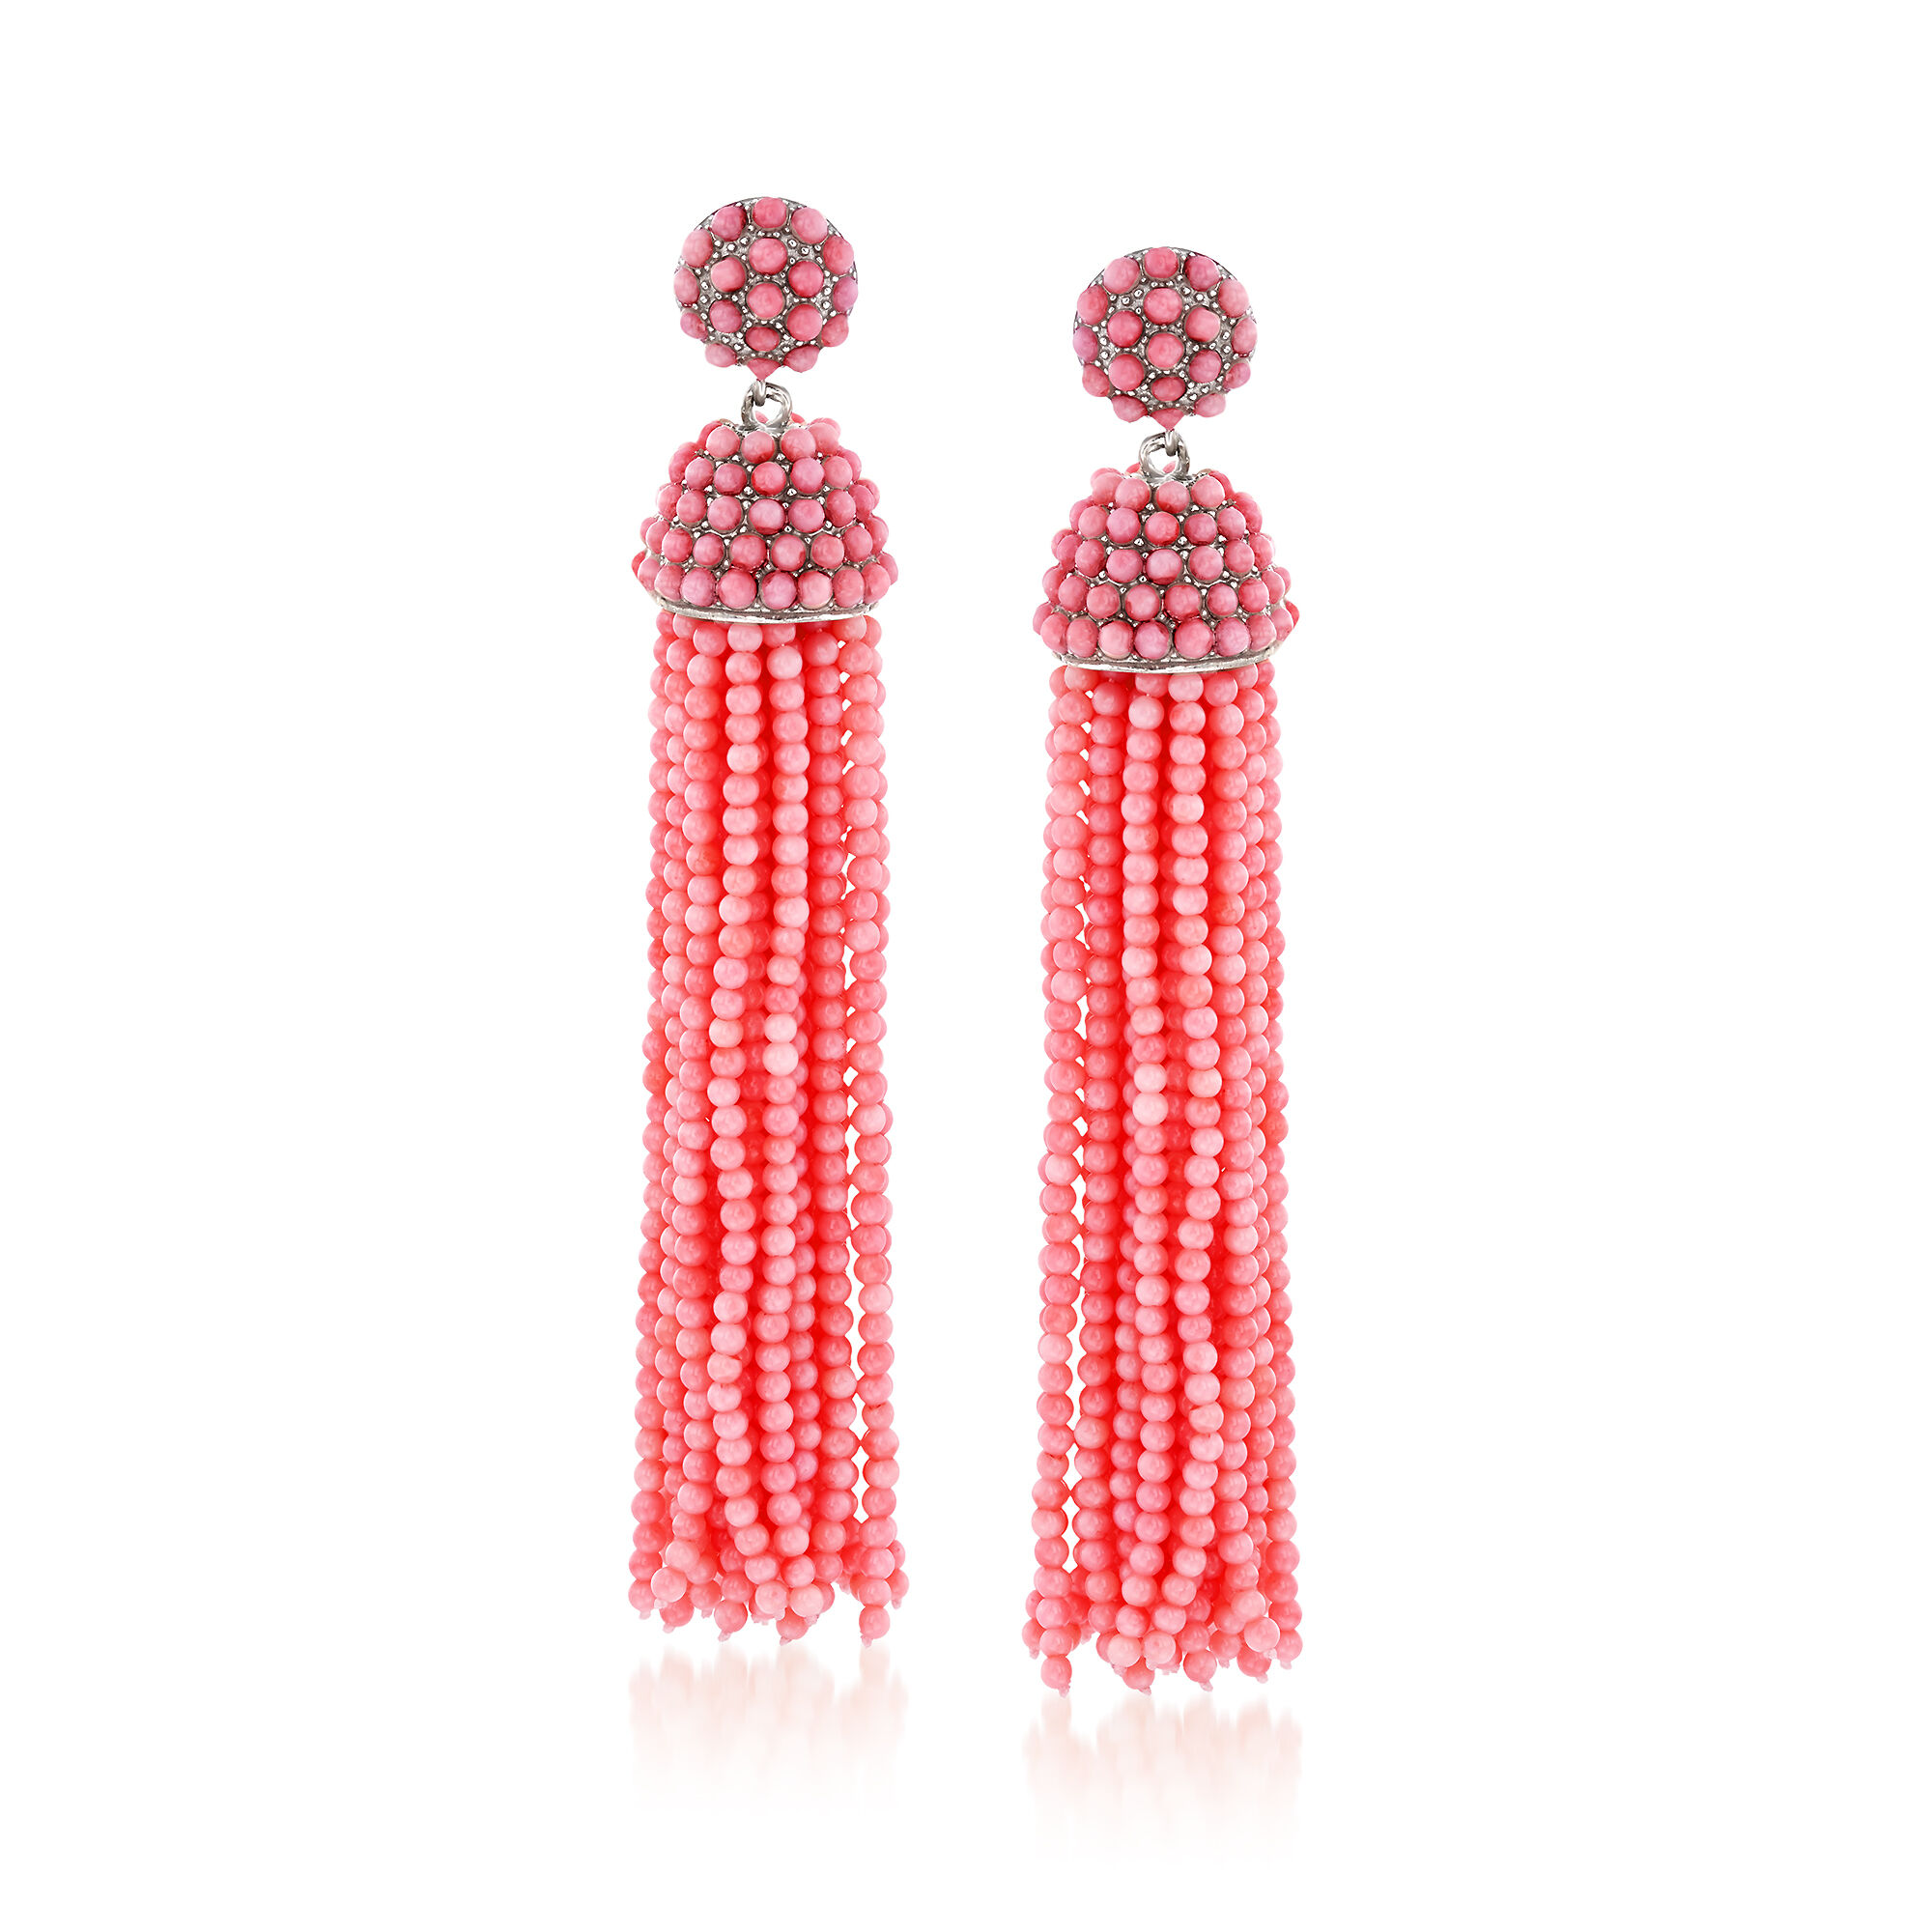 Pink Coral and Silver Native American Inspired Beaded Earrings BACK IN STOCK!